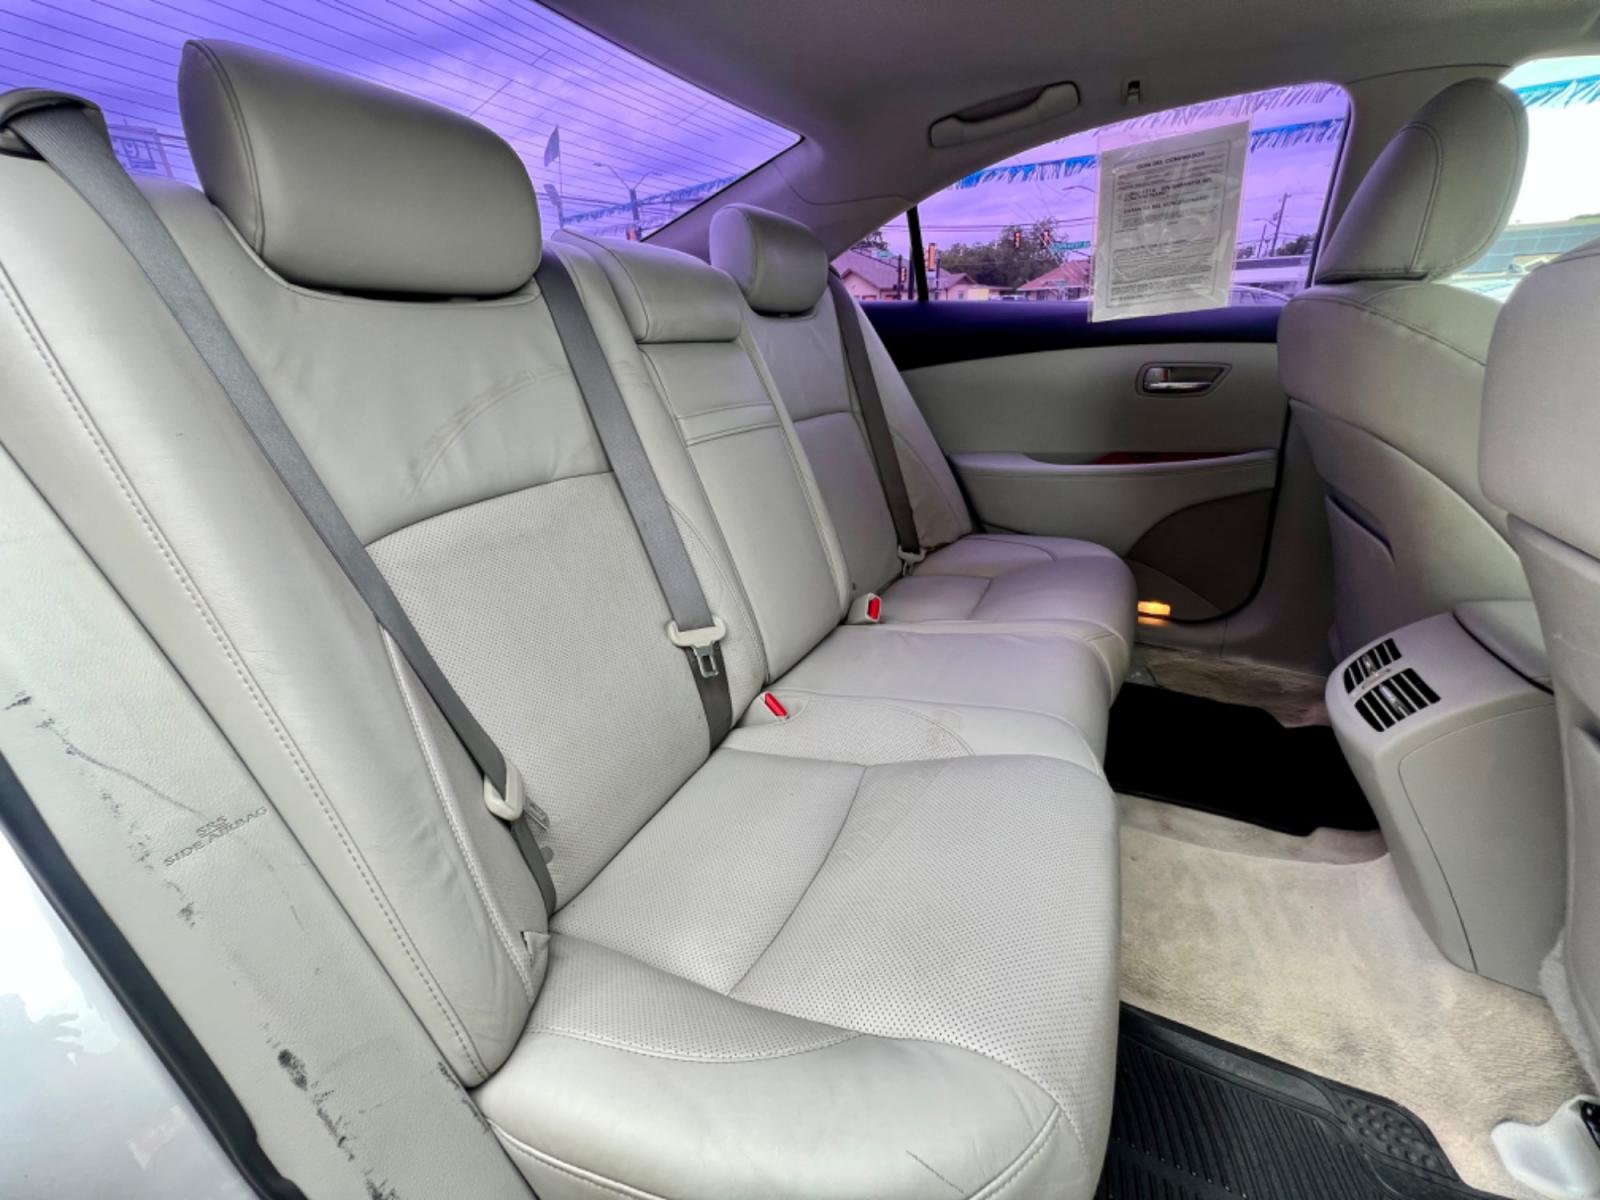 2007 SILVER LEXUS ES 350 BASE (JTHBJ46G072) , located at 5900 E. Lancaster Ave., Fort Worth, TX, 76112, (817) 457-5456, 0.000000, 0.000000 - CASH CAR ONLY, NO FINANCING AVAILABLE. THIS 2007 LEXUS ES 350 BASE 4 DOOR SEDAN RUNS AND DRIVES GREAT. IT IS EQUIPPED WITH A CD PLAYER, AM/FM RADIO AND AN AUX PORT. THE TIRES ARE IN GOOD CONDITION AND STILL HAVE TREAD LEFT ON THEM. THIS CAR WILL NOT LAST SO ACT FAST! Call or text Frances at 68 - Photo #14